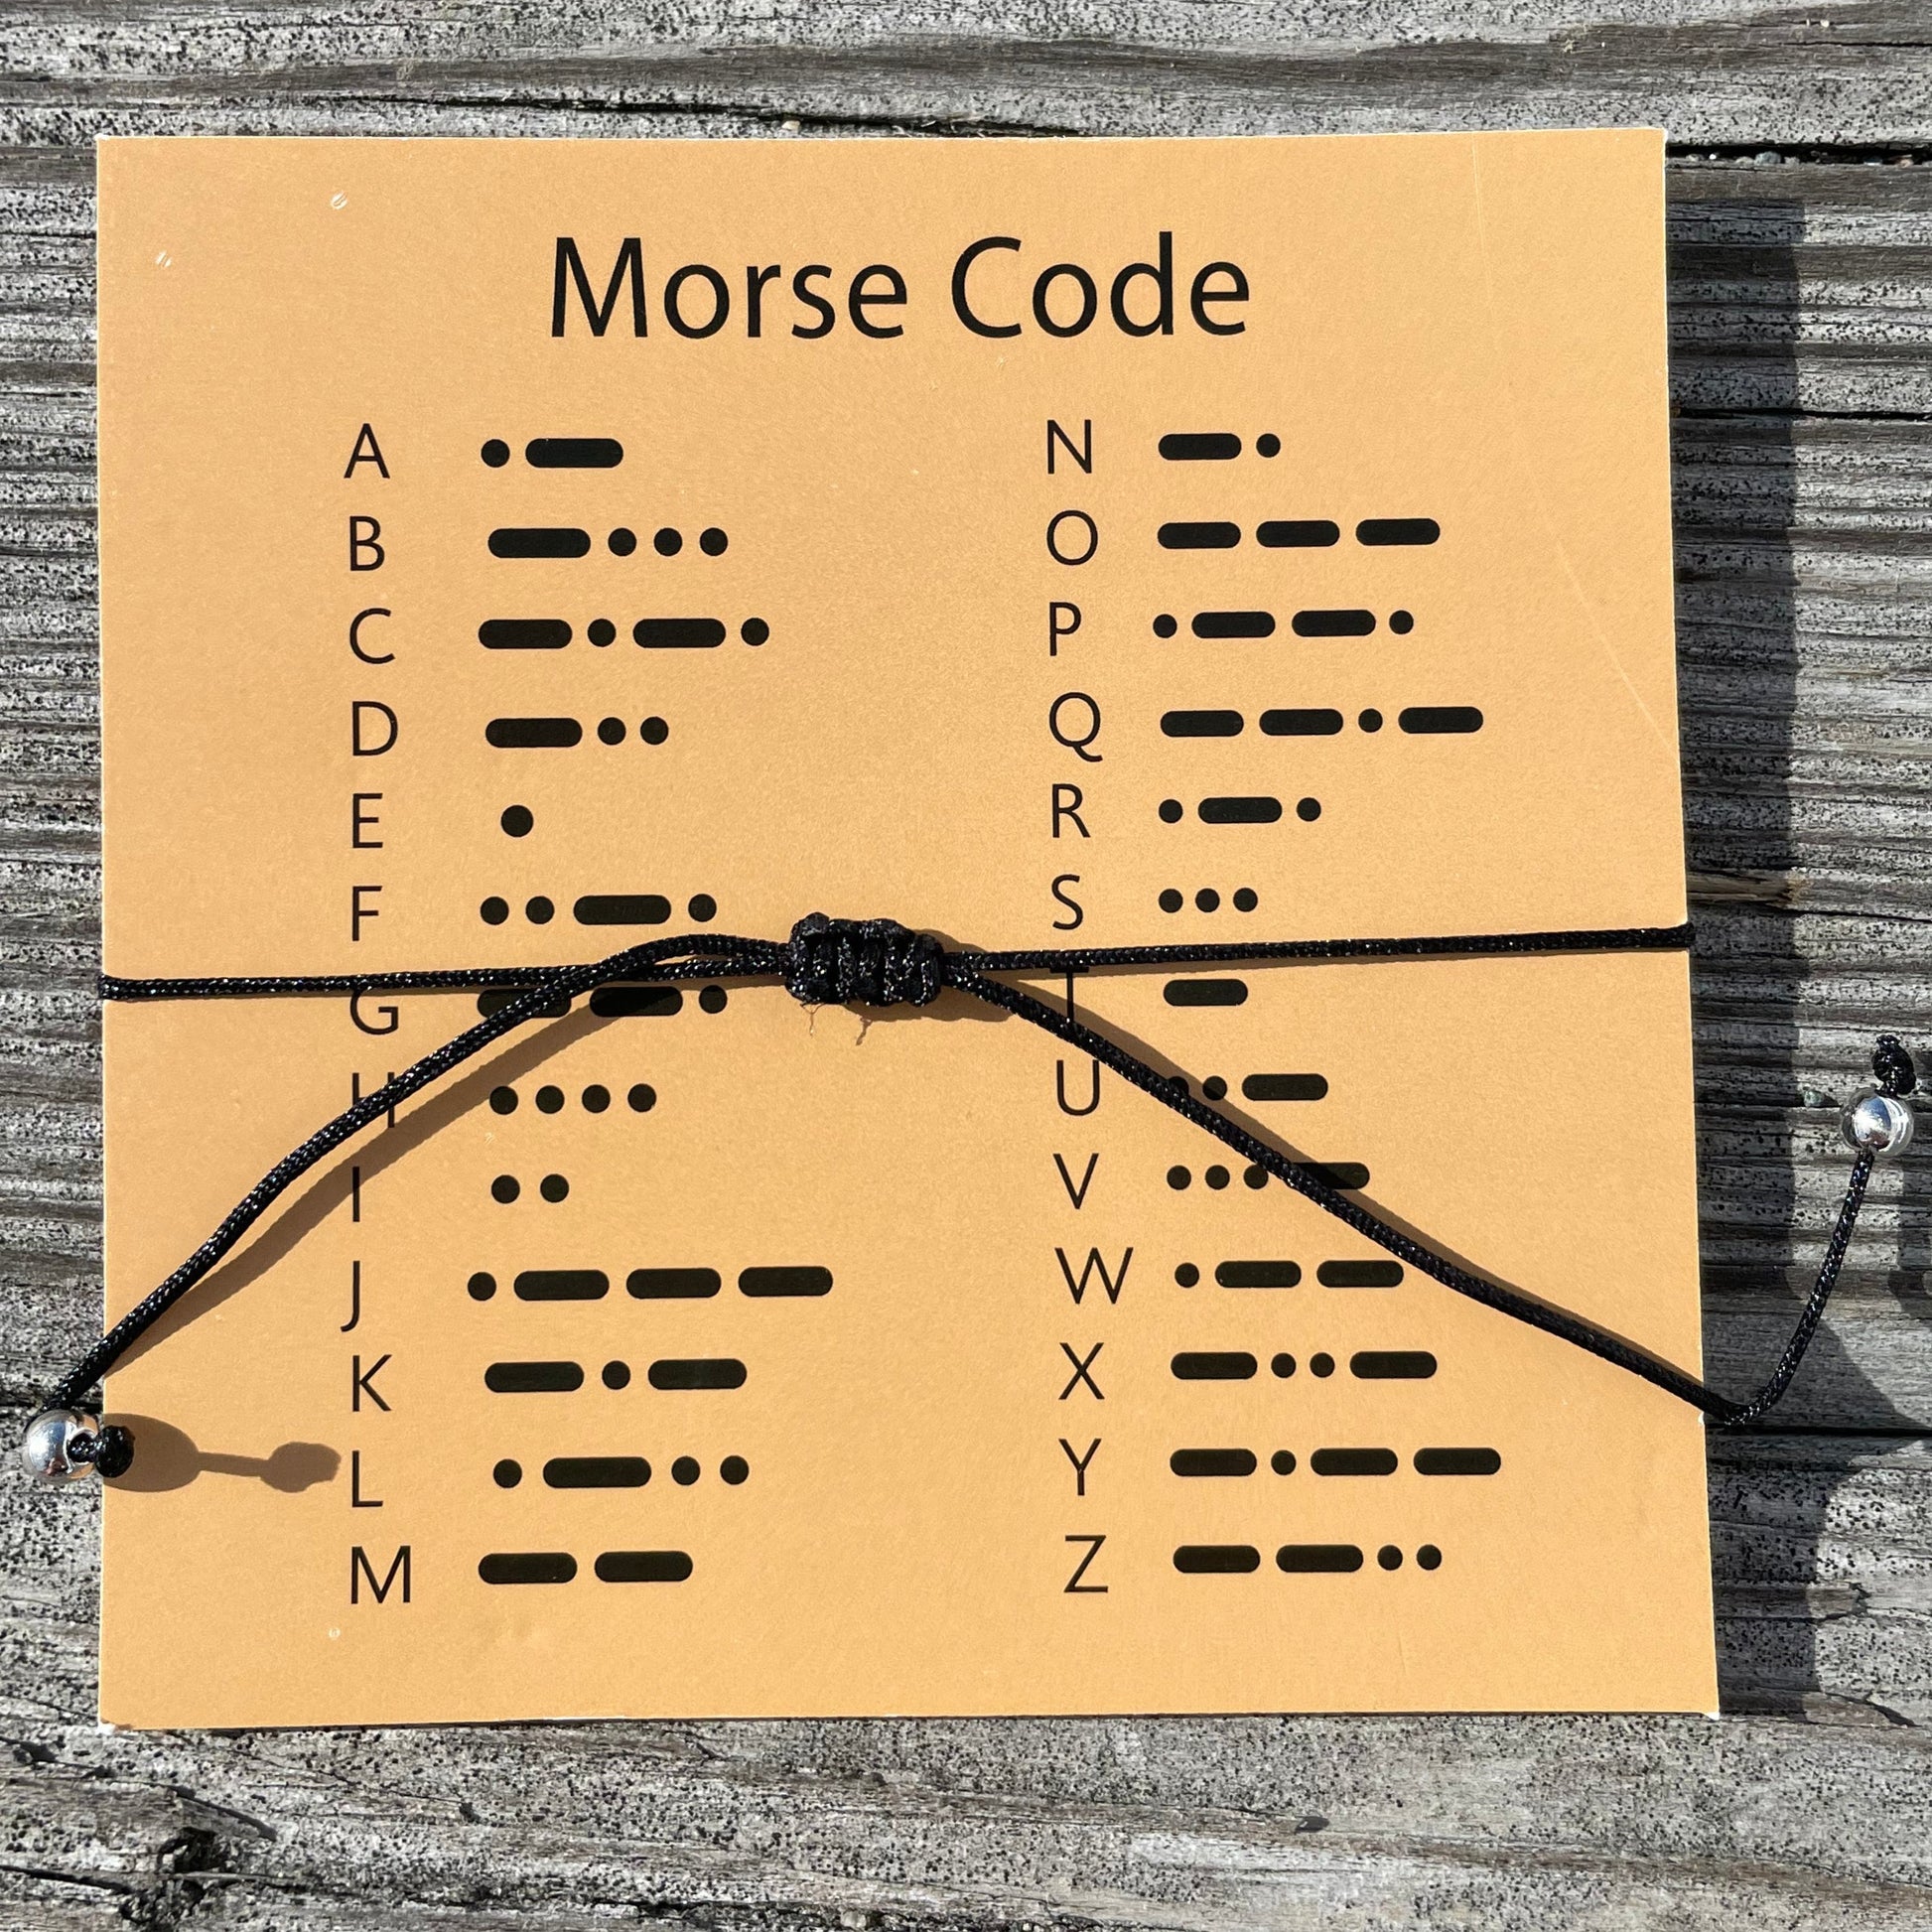 Back of card with morse code dot meanings for alphabet from A-Z